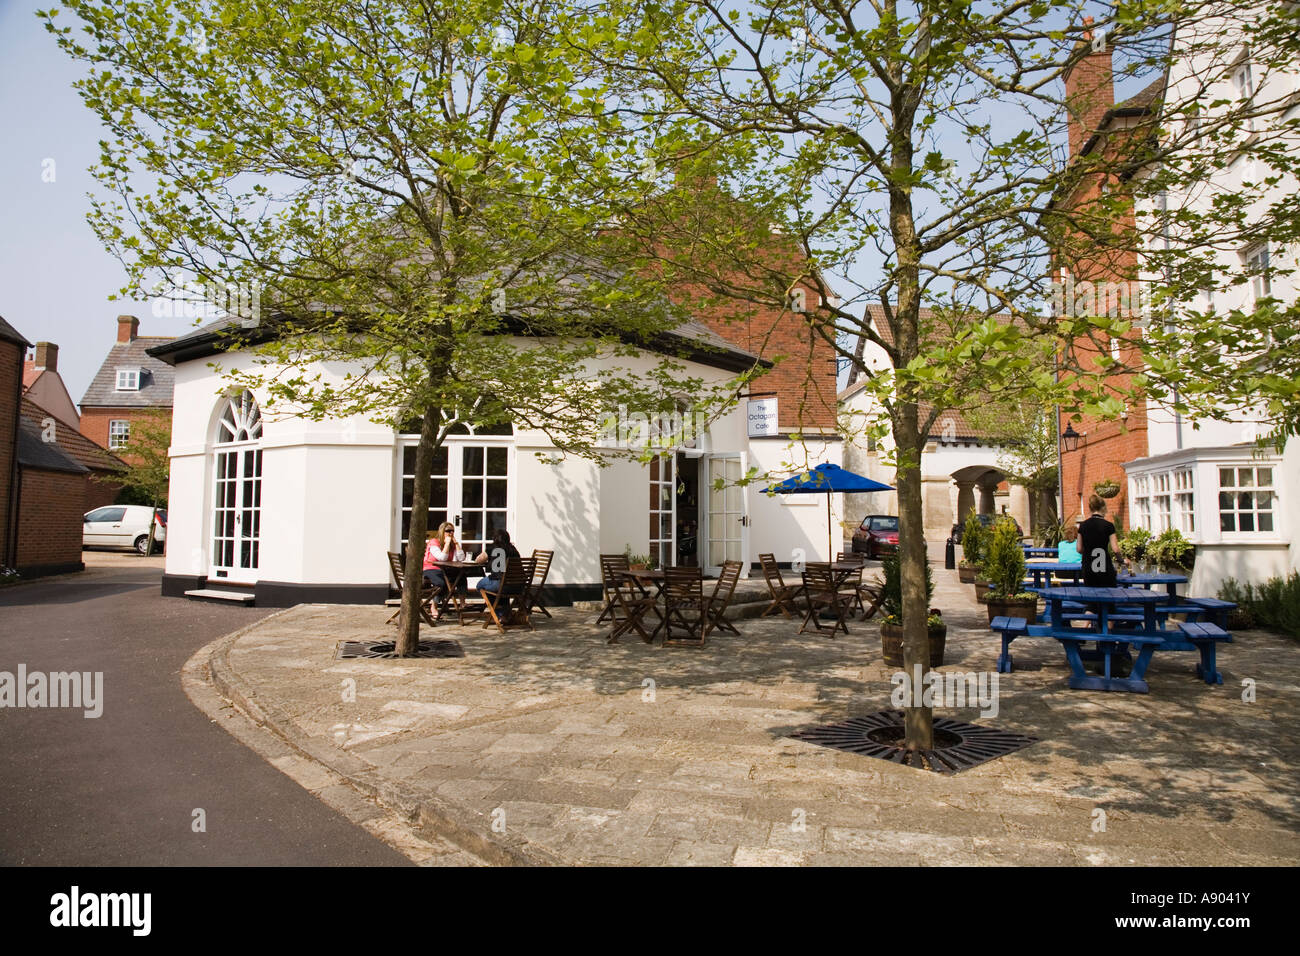 Square with trees and waitress serving outside table customer / customers tables at the Octagon cafe Poundbury Dorchester Dorset UK Stock Photo